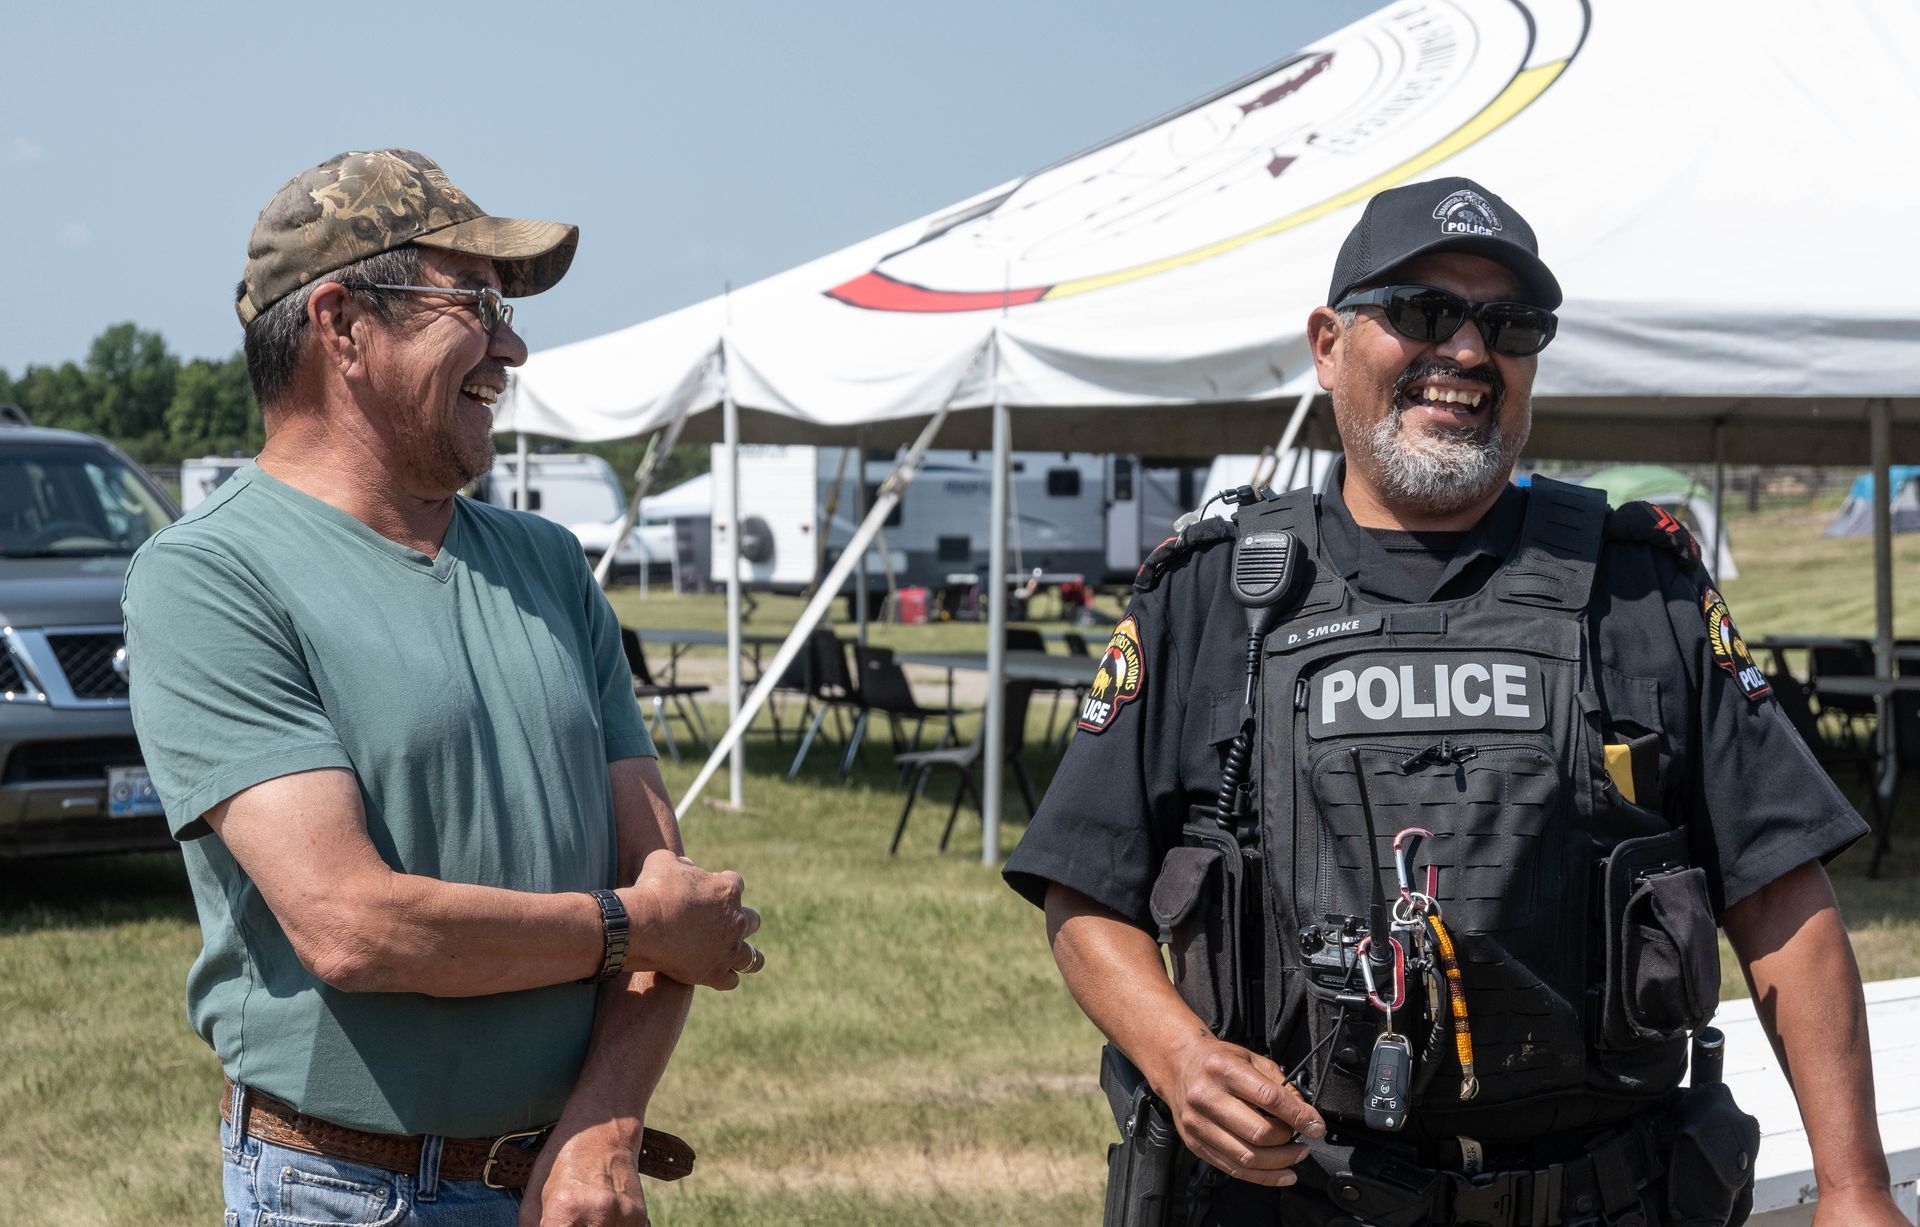 MFNPS-Manitoba First Nations Police Service Officer with community member